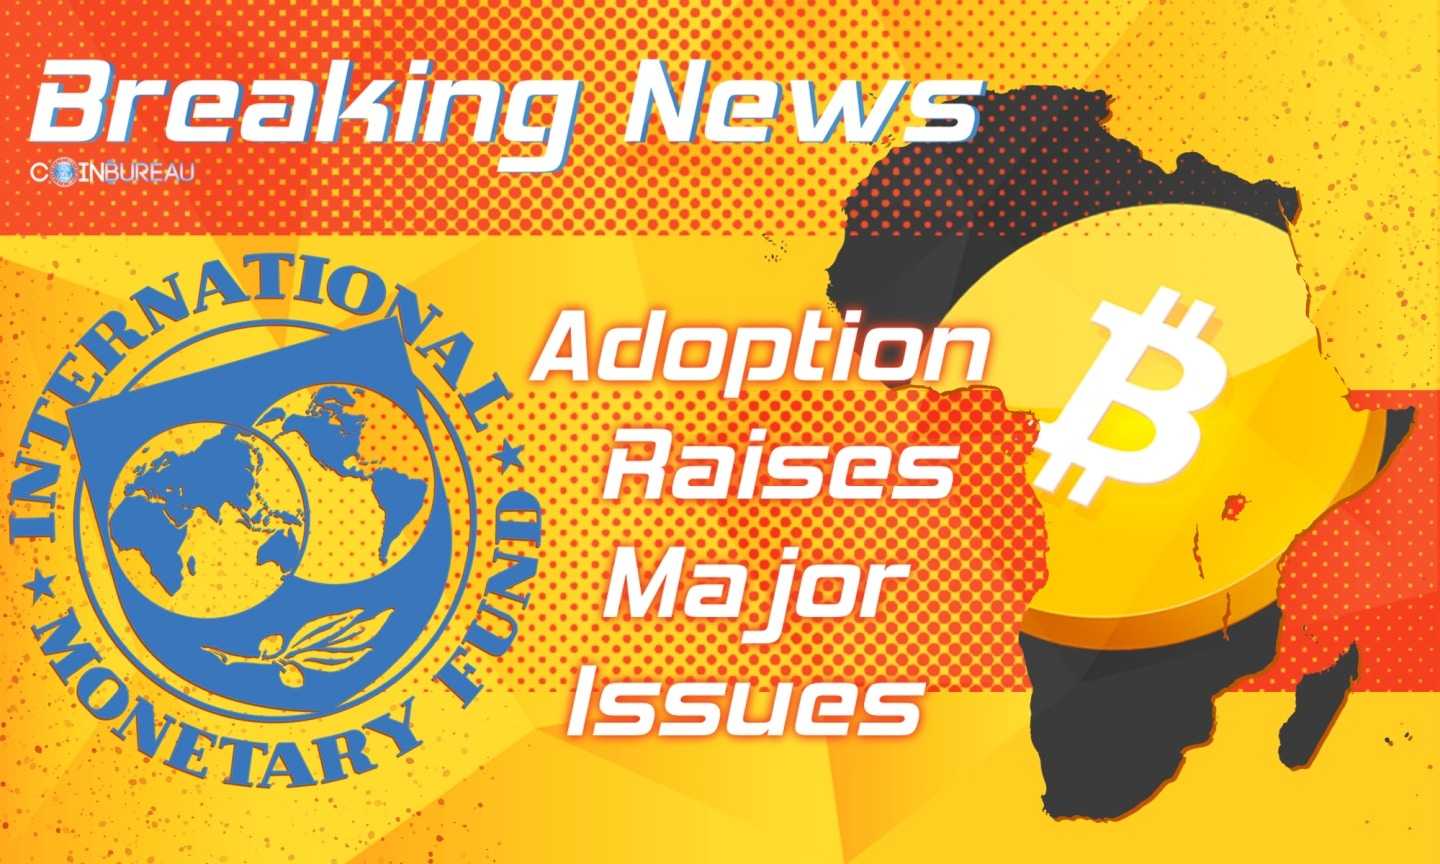 IMF Says Bitcoin Adoption In Central Africa Raises Major Issues